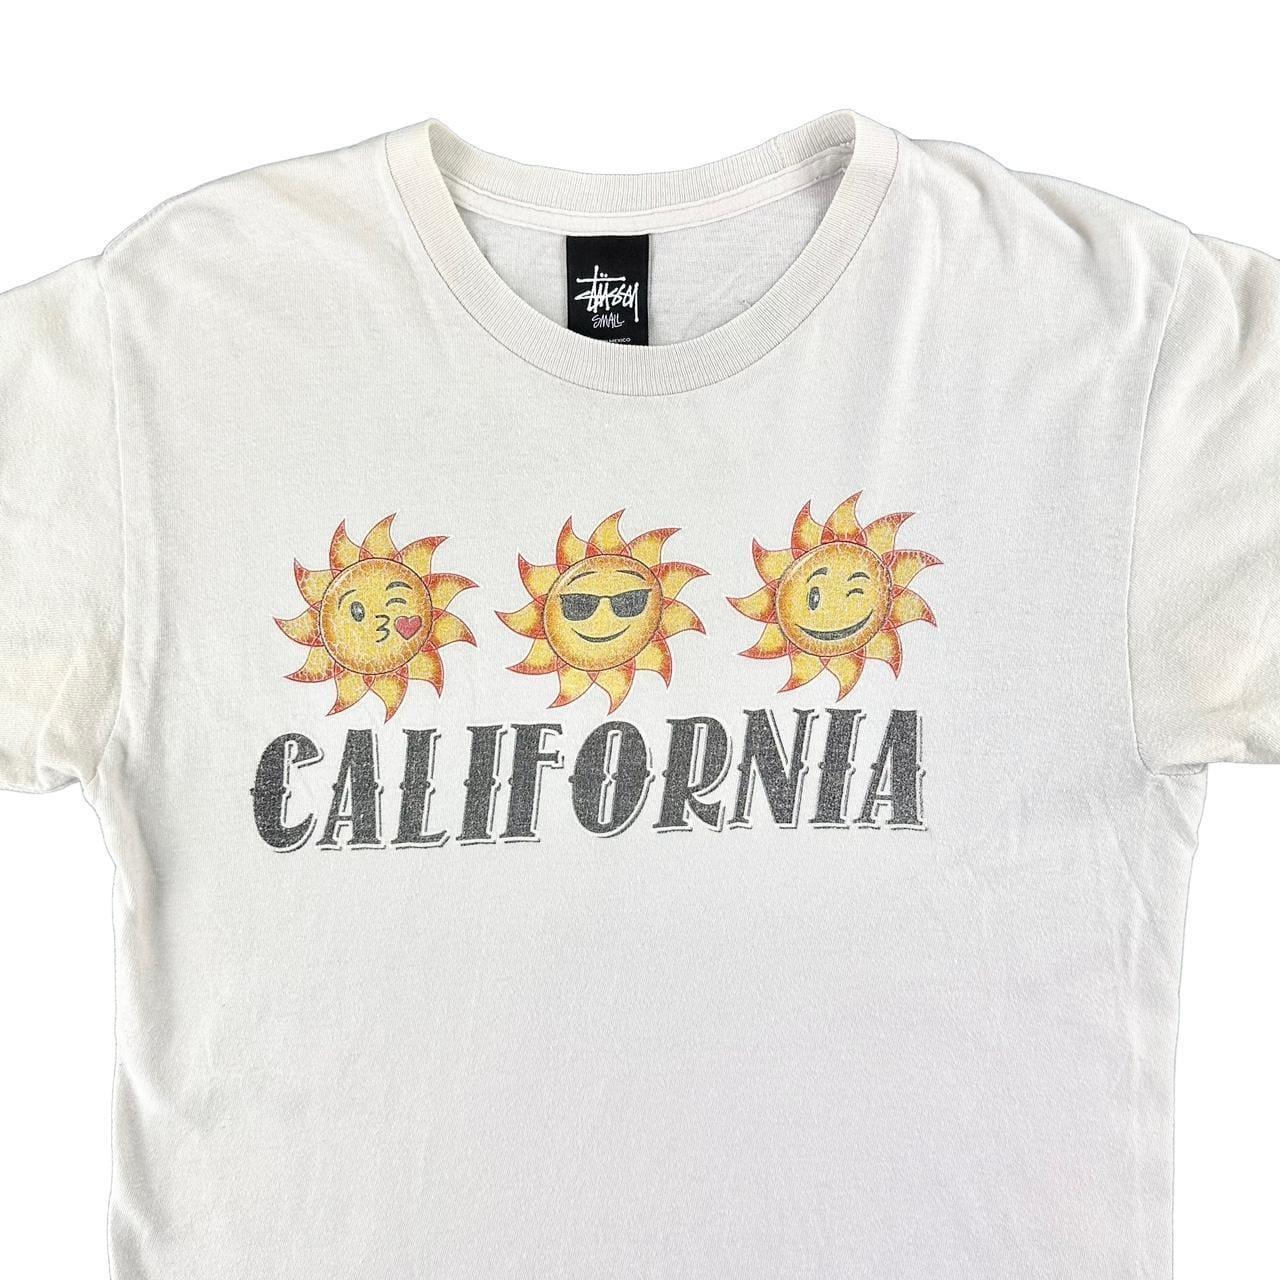 Stussy California t shirt size S - Known Source